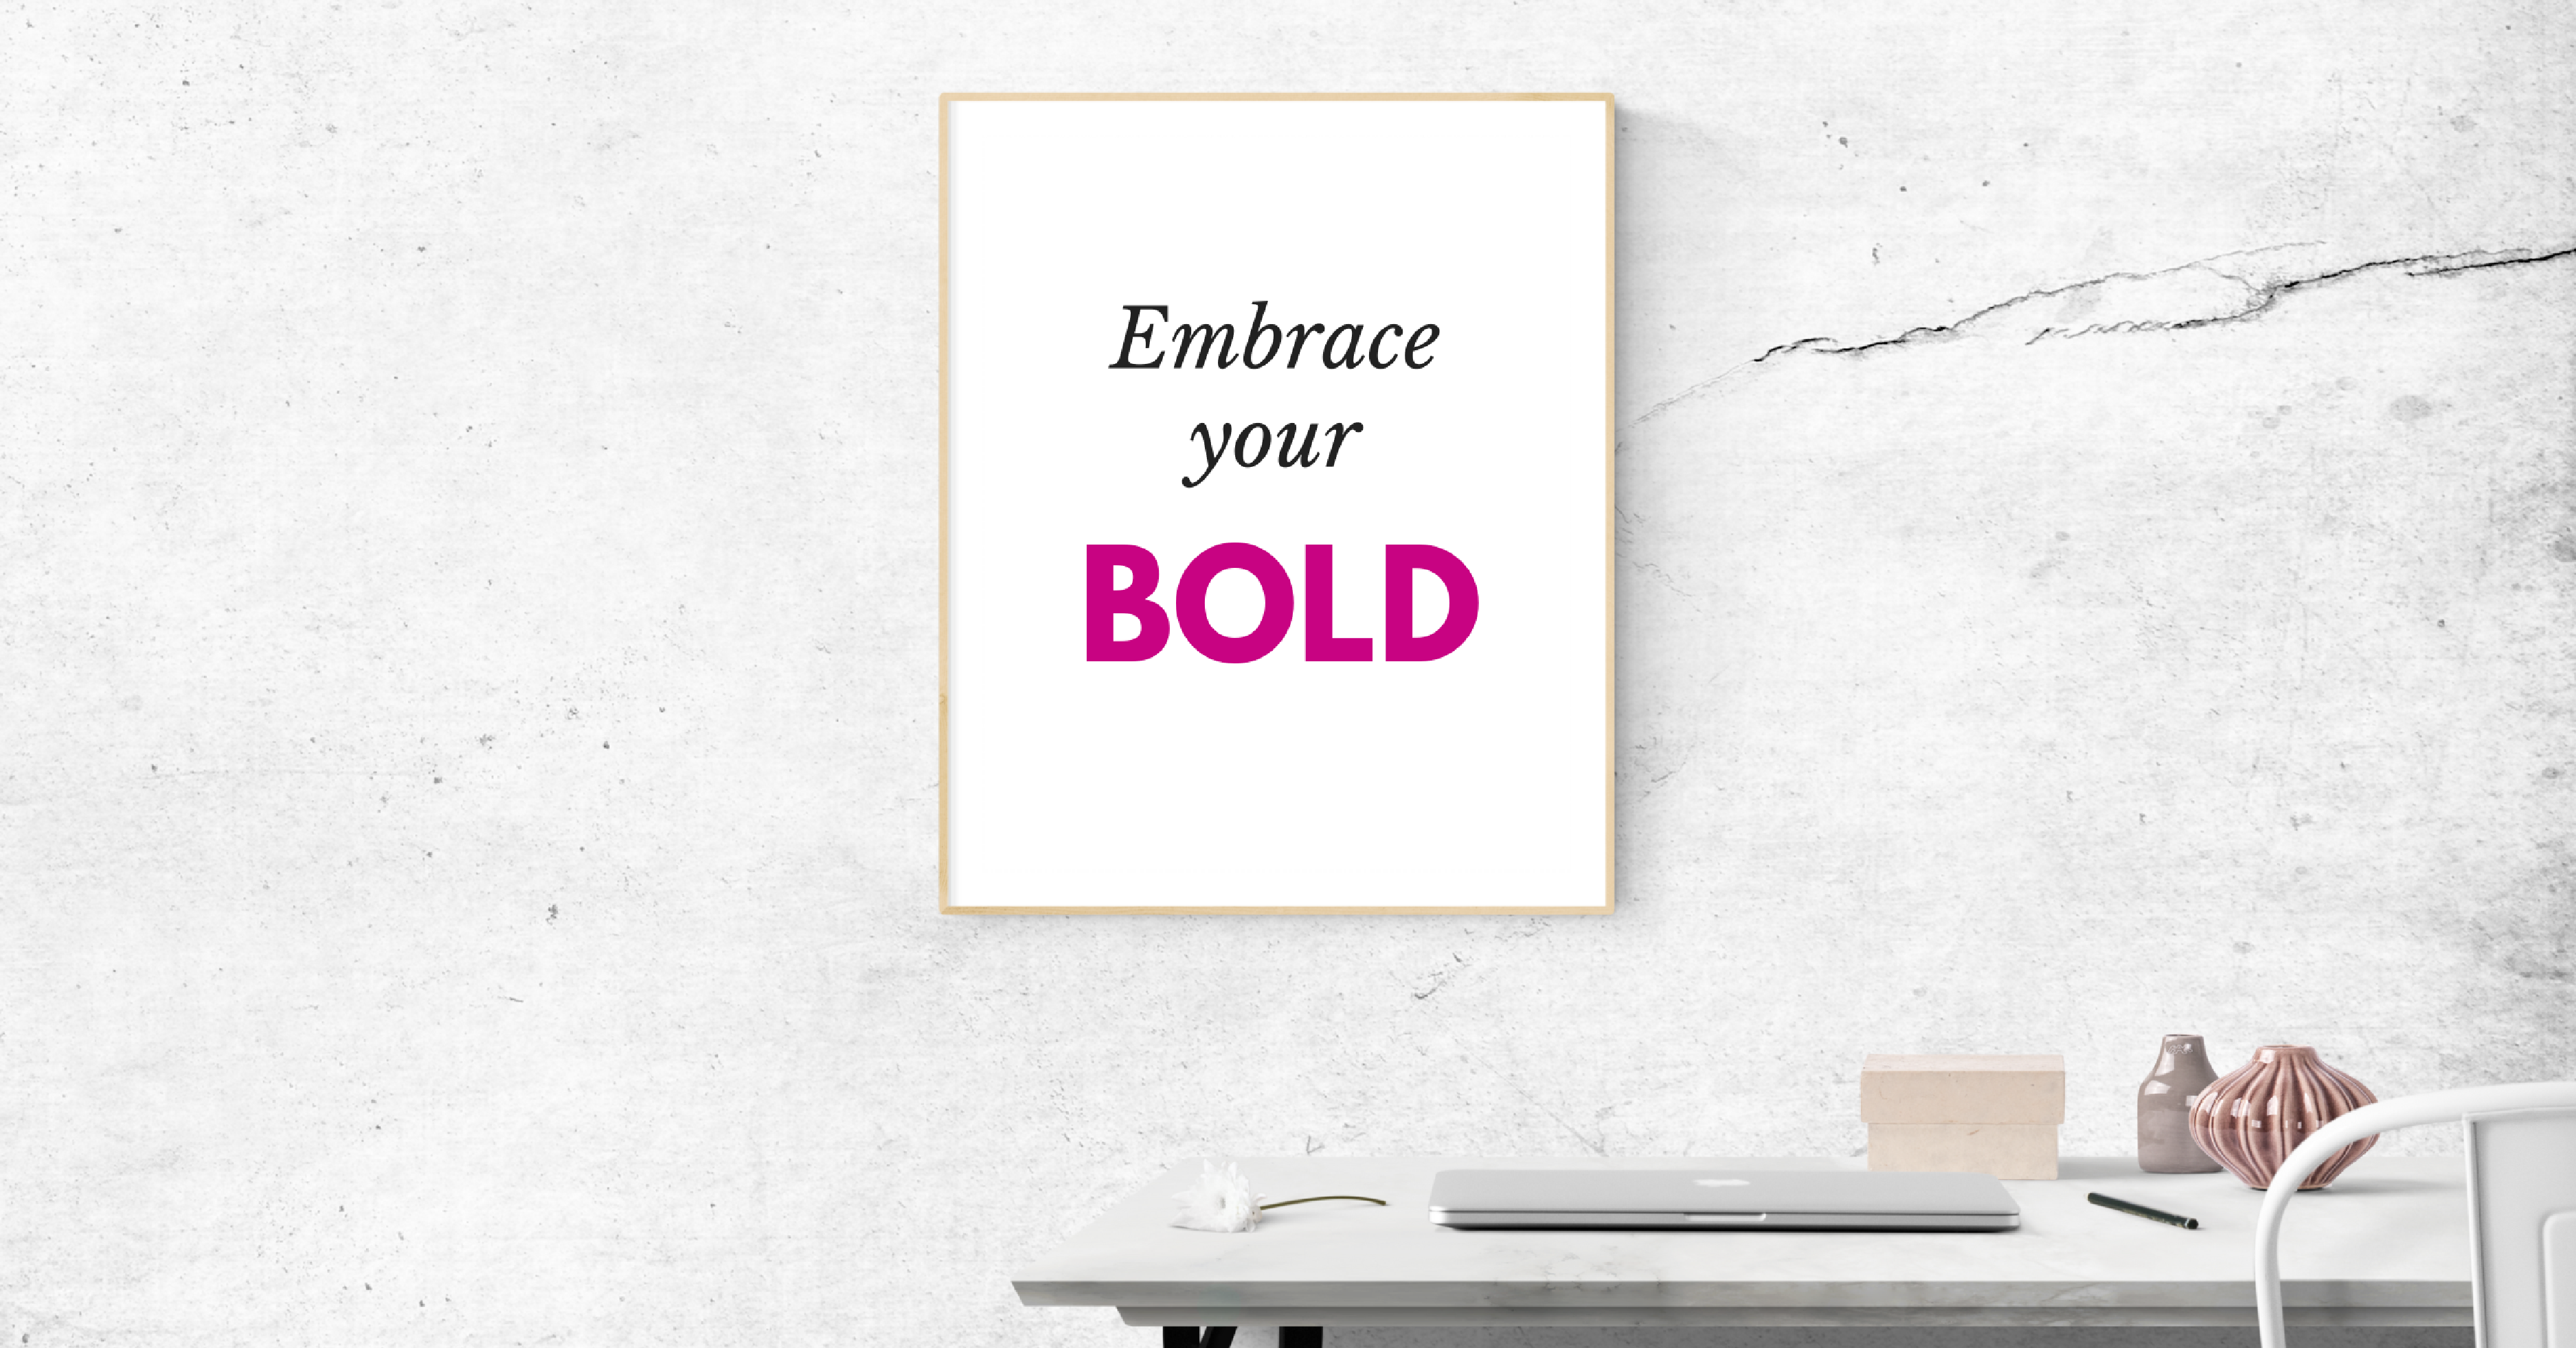 Have you ever prayed for boldness? When you do, just be sure you're ready for the bold move God asks you to make. Because when He calls you to embrace bold, he means it. Yet, He will never leave you alone. He will walk you through it. So, go ahead, be bold!